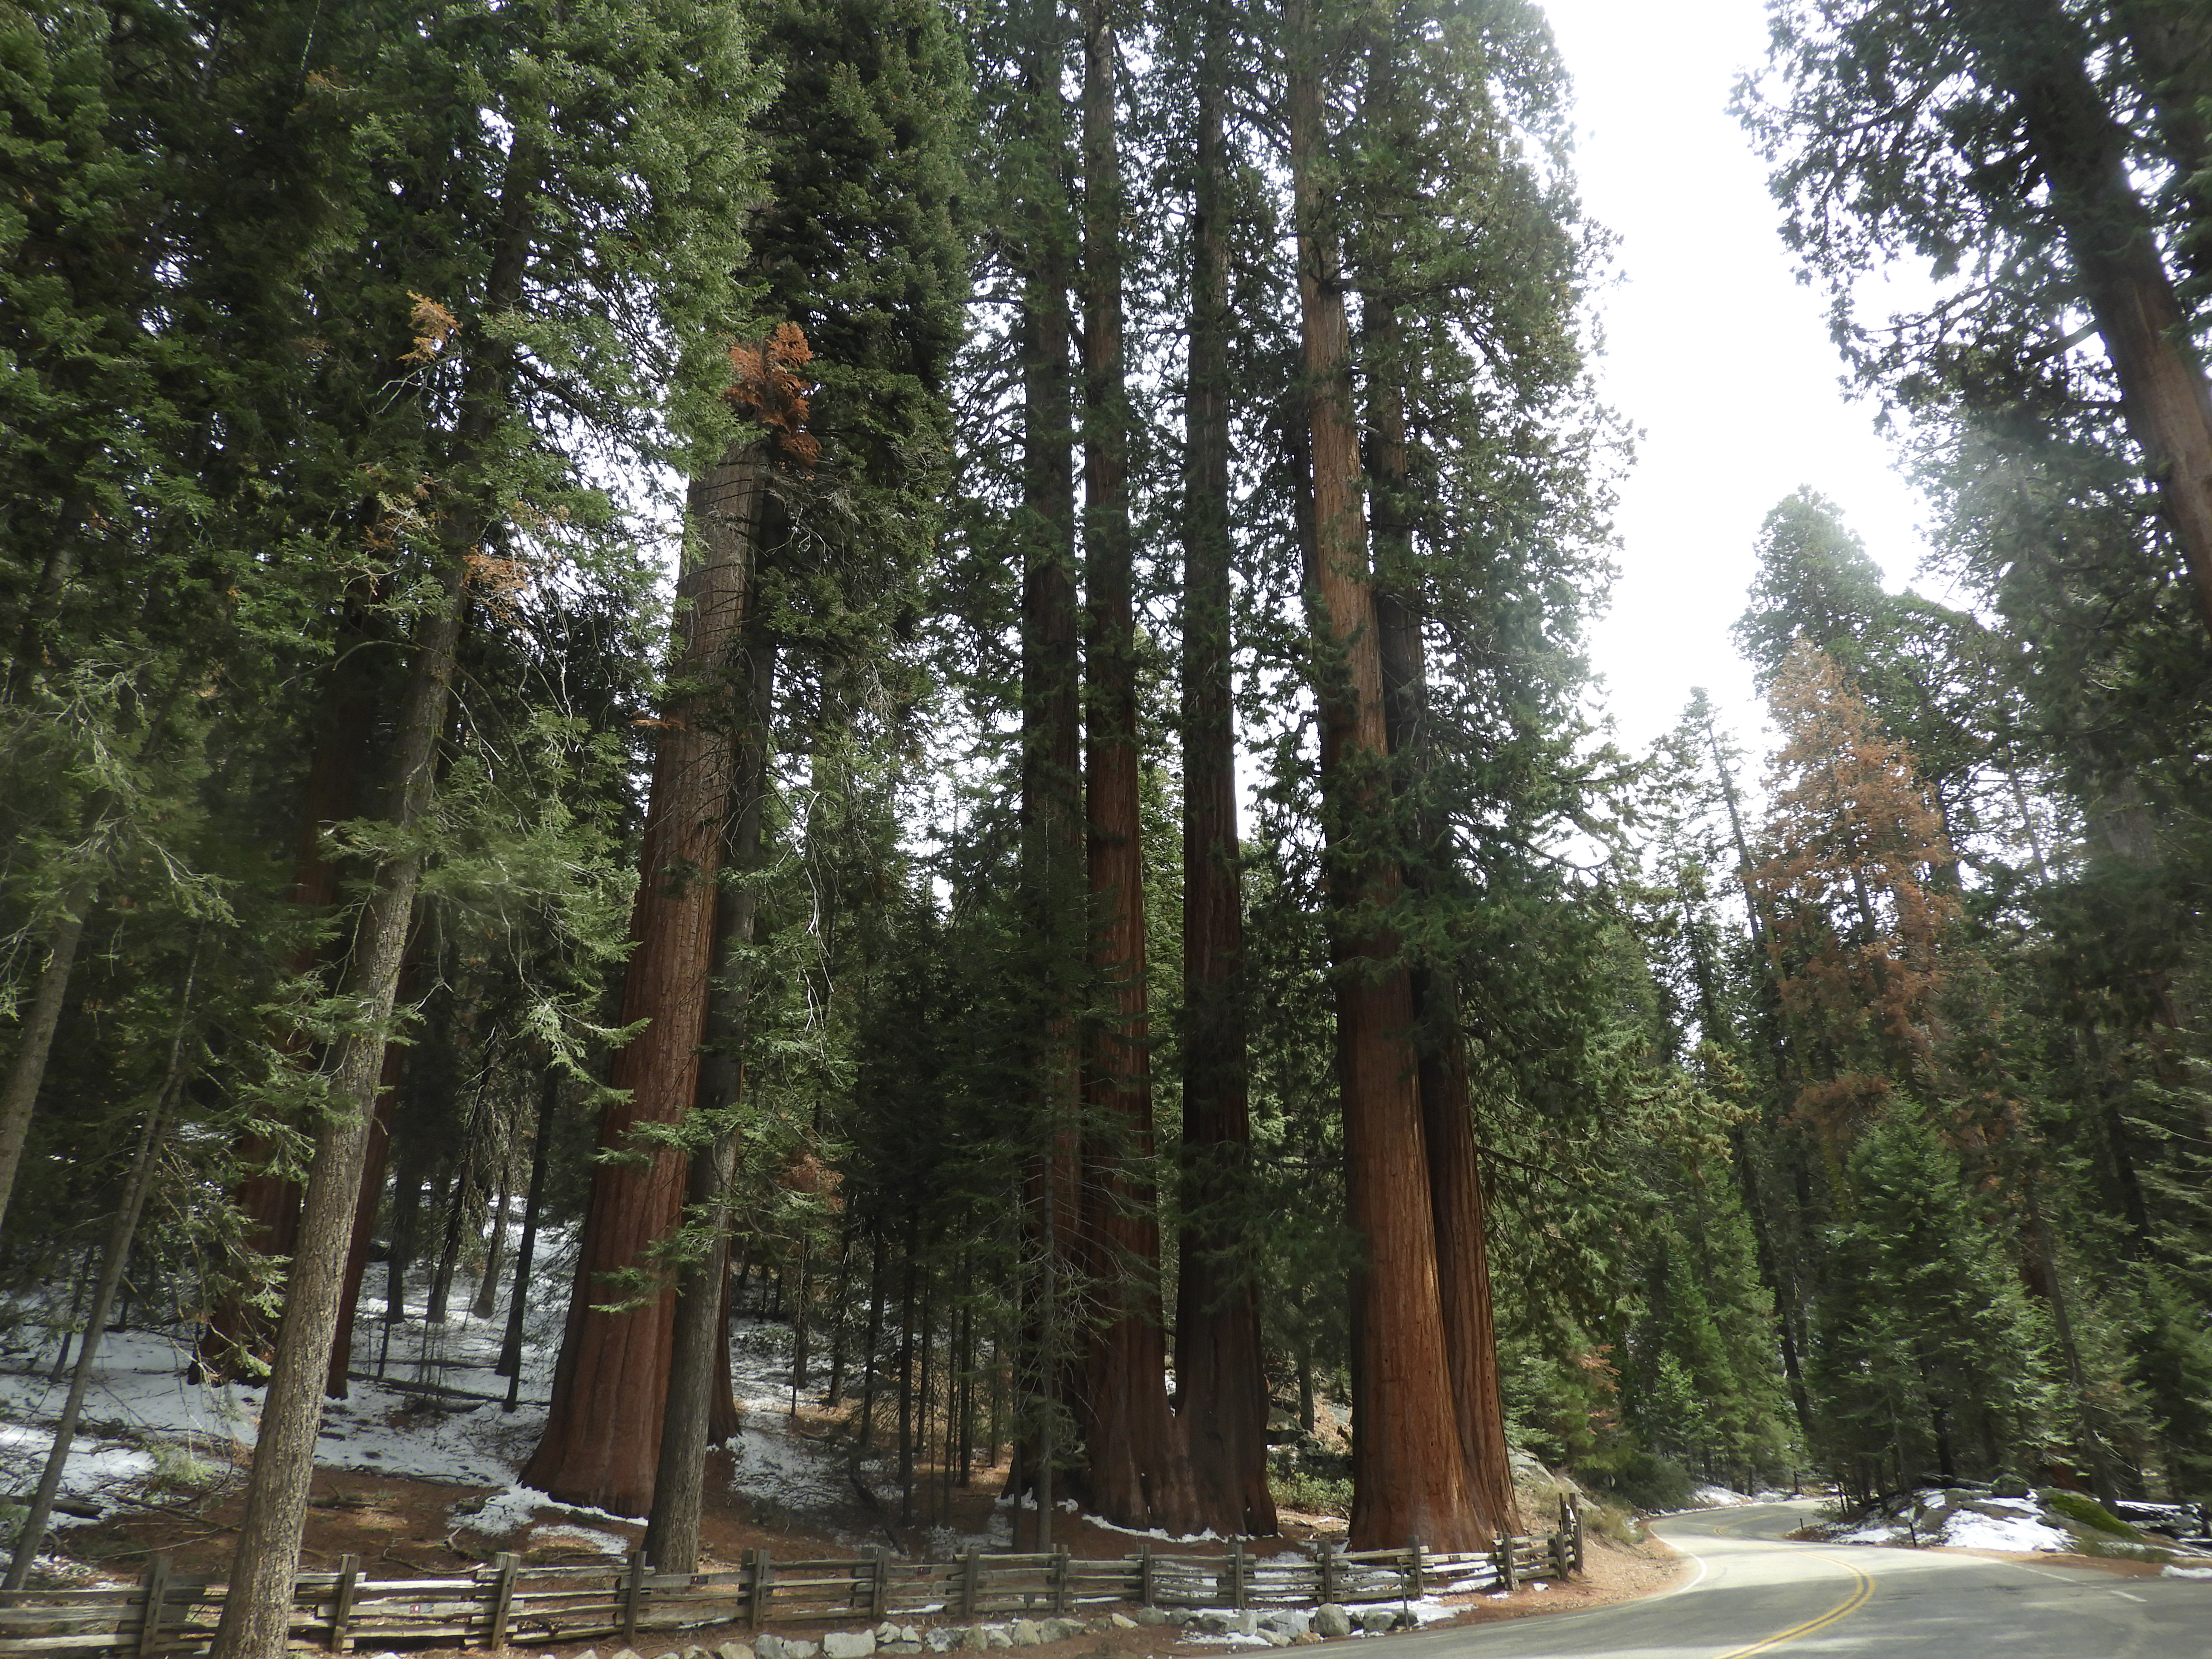 Sequoia National Park in southeastern California